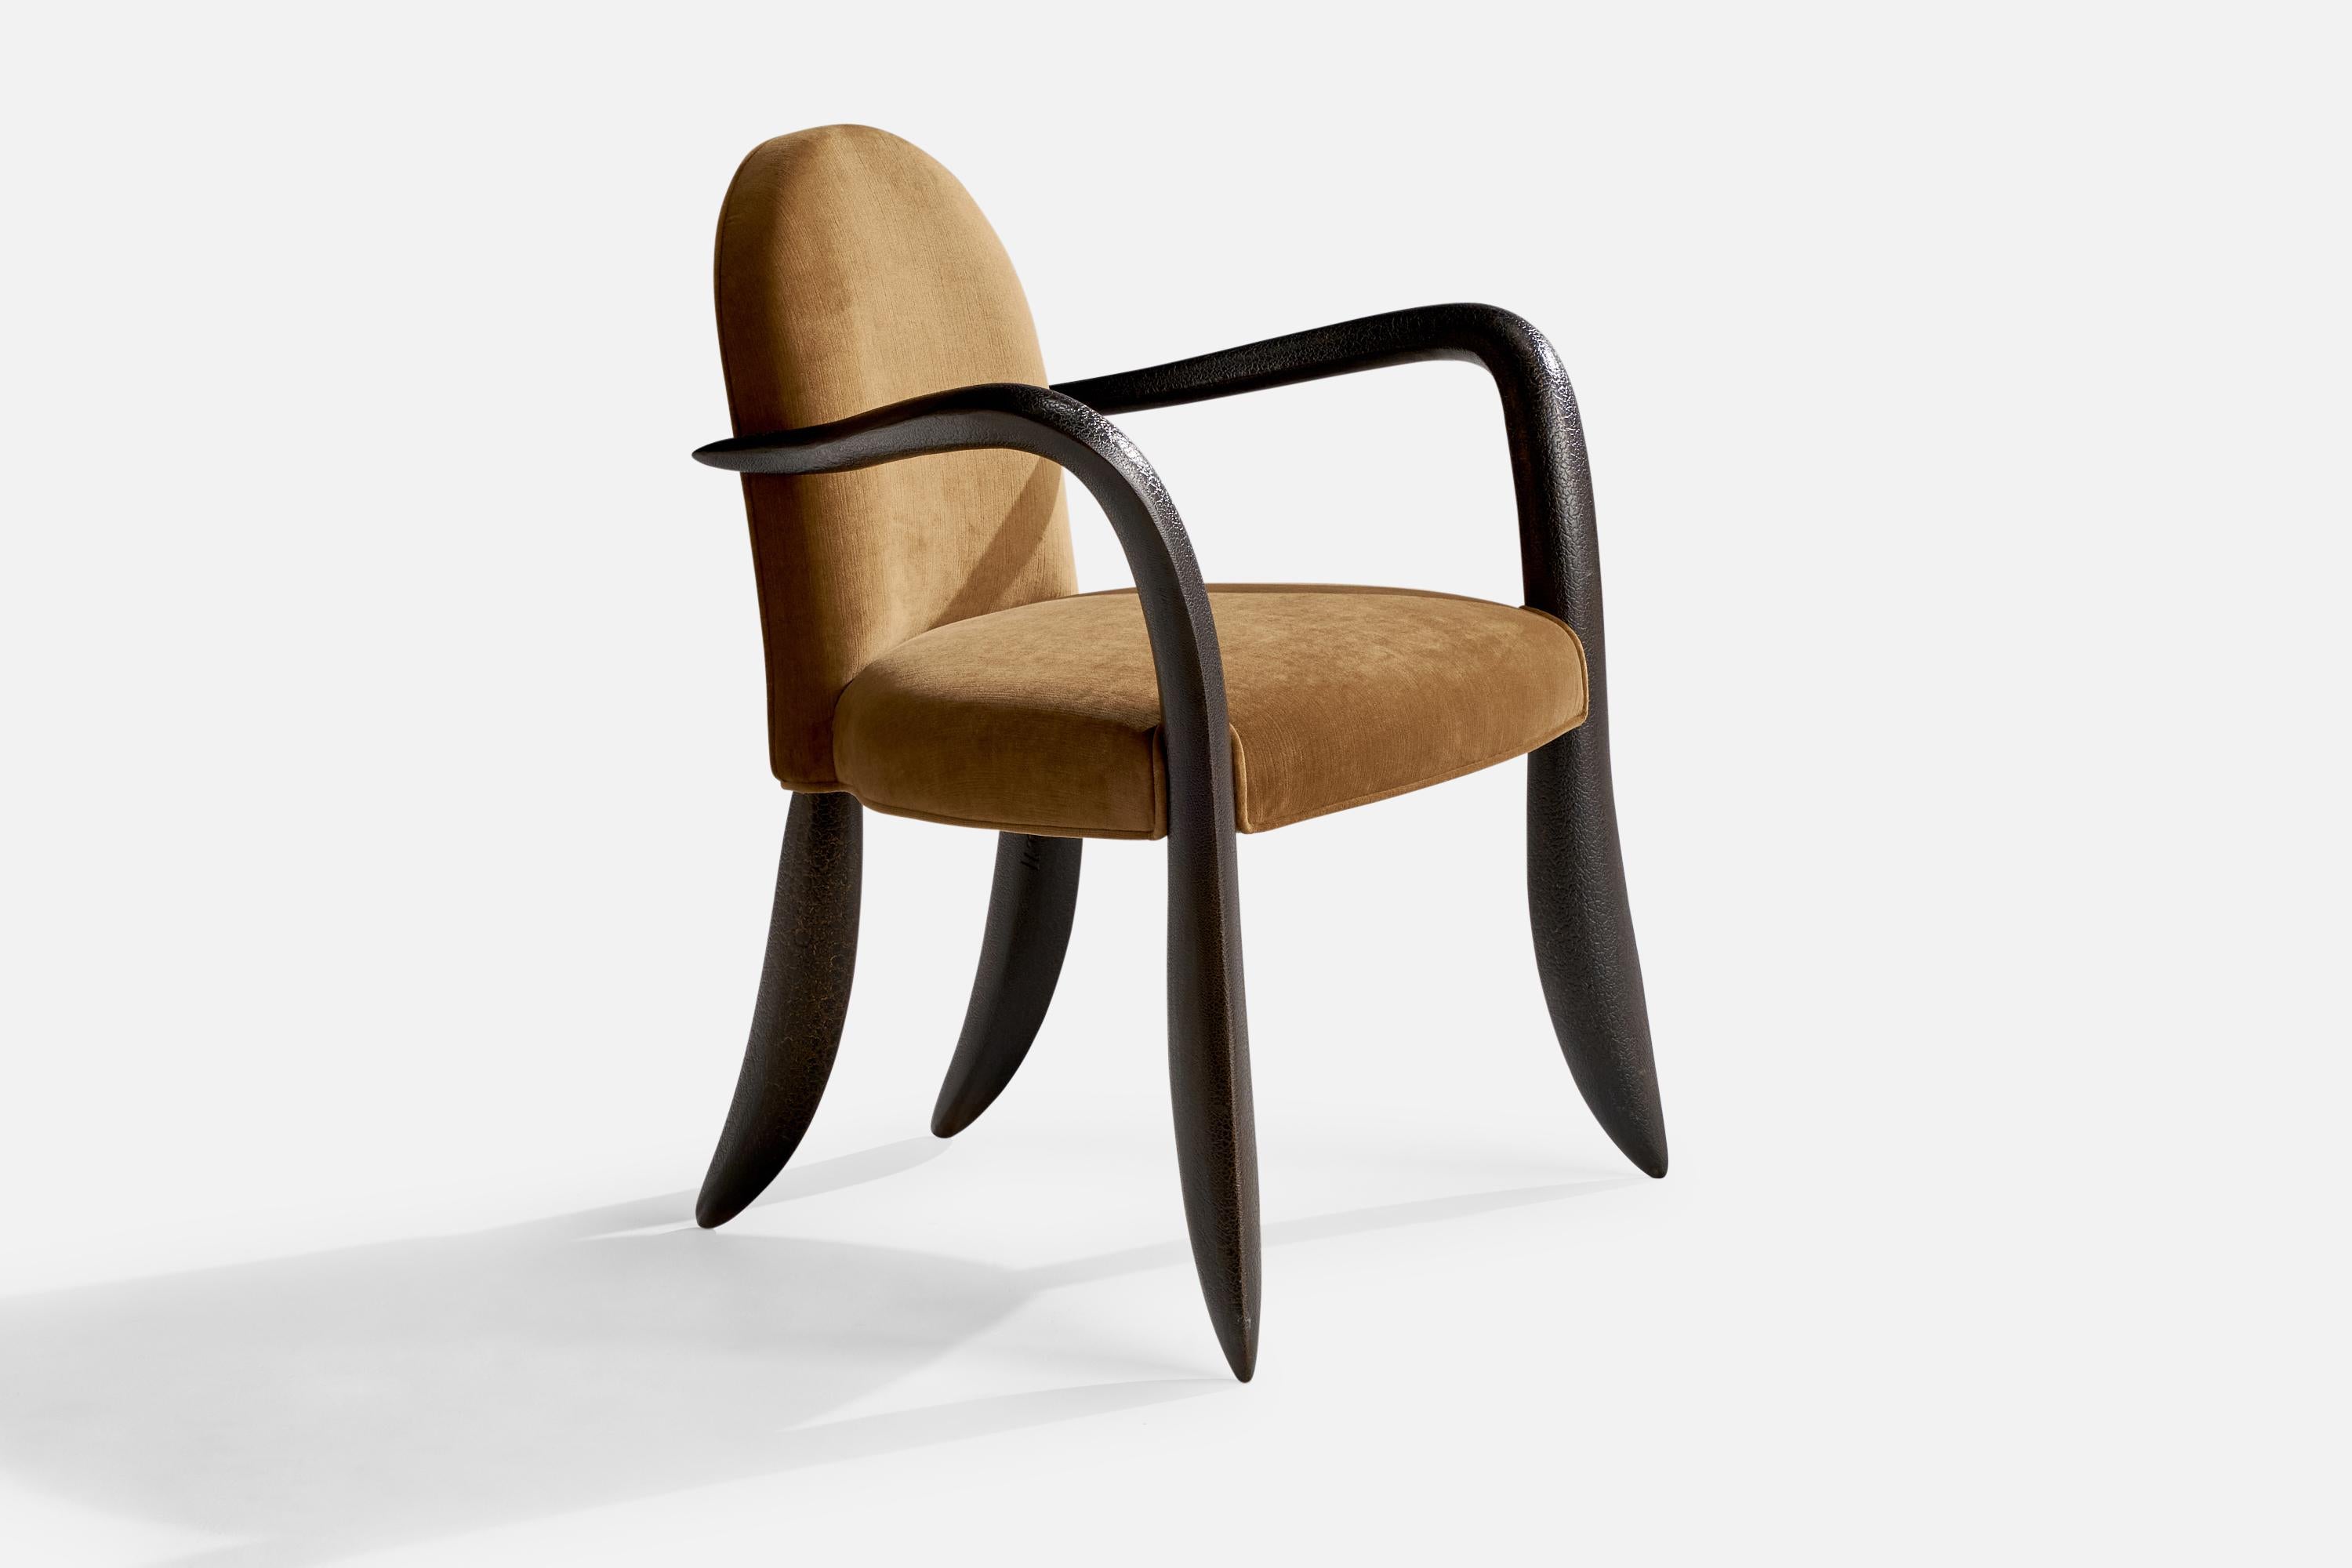 A beige velvet and textured black-painted mahogany armchair designed and produced by Wendell Castle, USA, 1997.

Seat height 18”